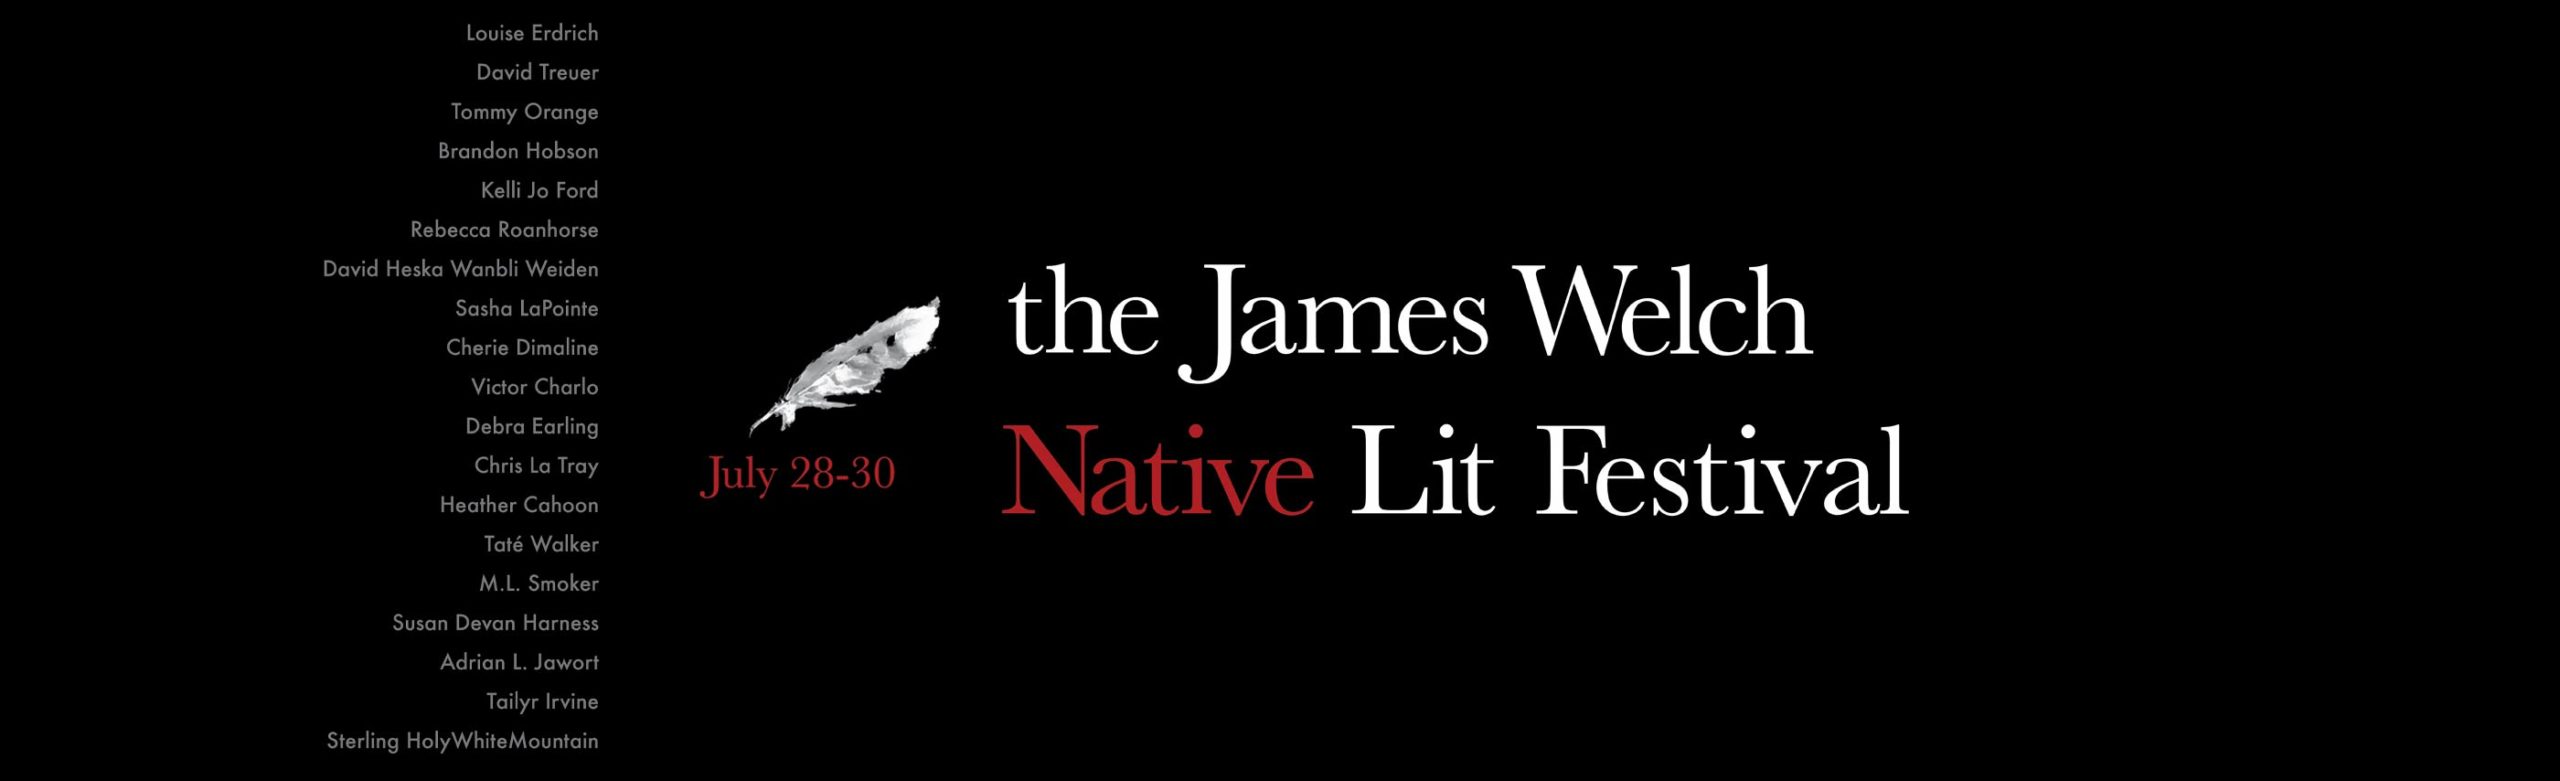 The James Welch Native Lit Festival Image